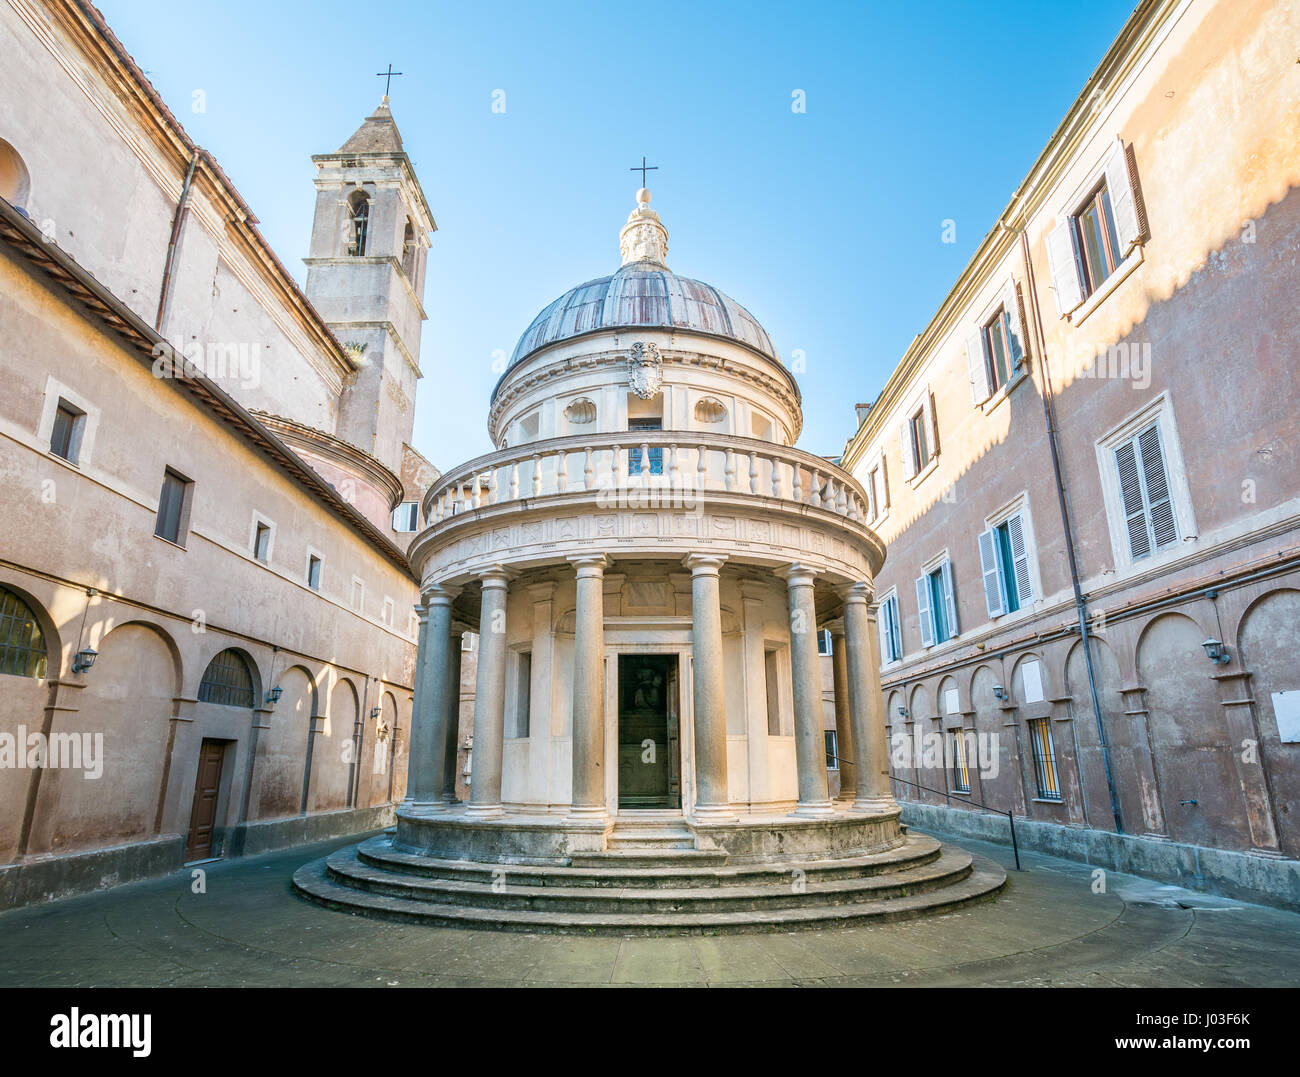 San Pietro In Montorio High Resolution Stock Photography and Images - Alamy